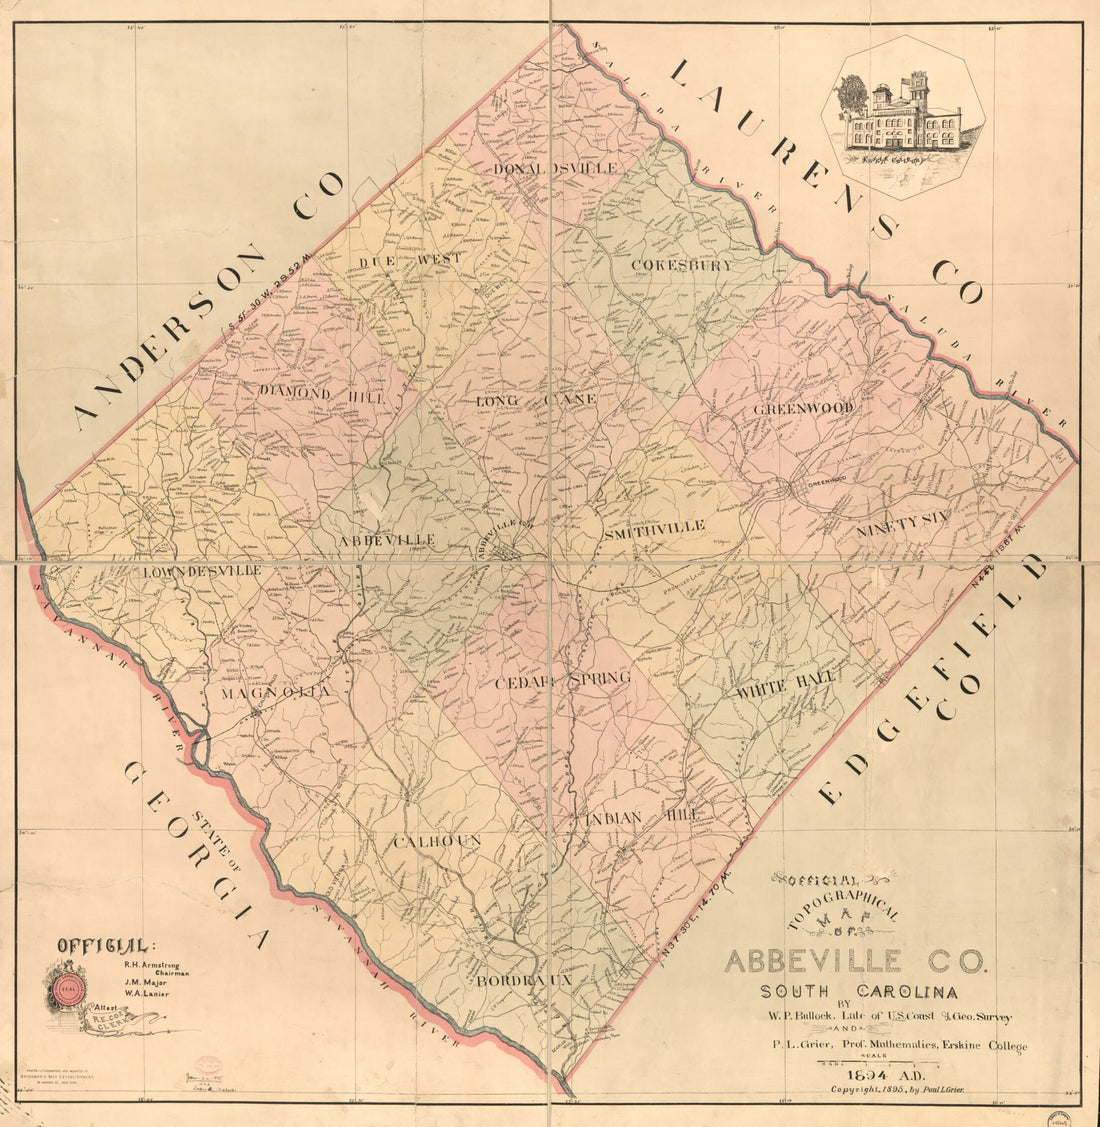 This old map of Official Topographical Map of Abbeville Co., South Carolina (Topographical Map of Abbeville County, South Carolina, Map of Abbeville County, South Carolina) from 1895 was created by W. P. (William P.) Bullock, Paul L. Grier in 1895